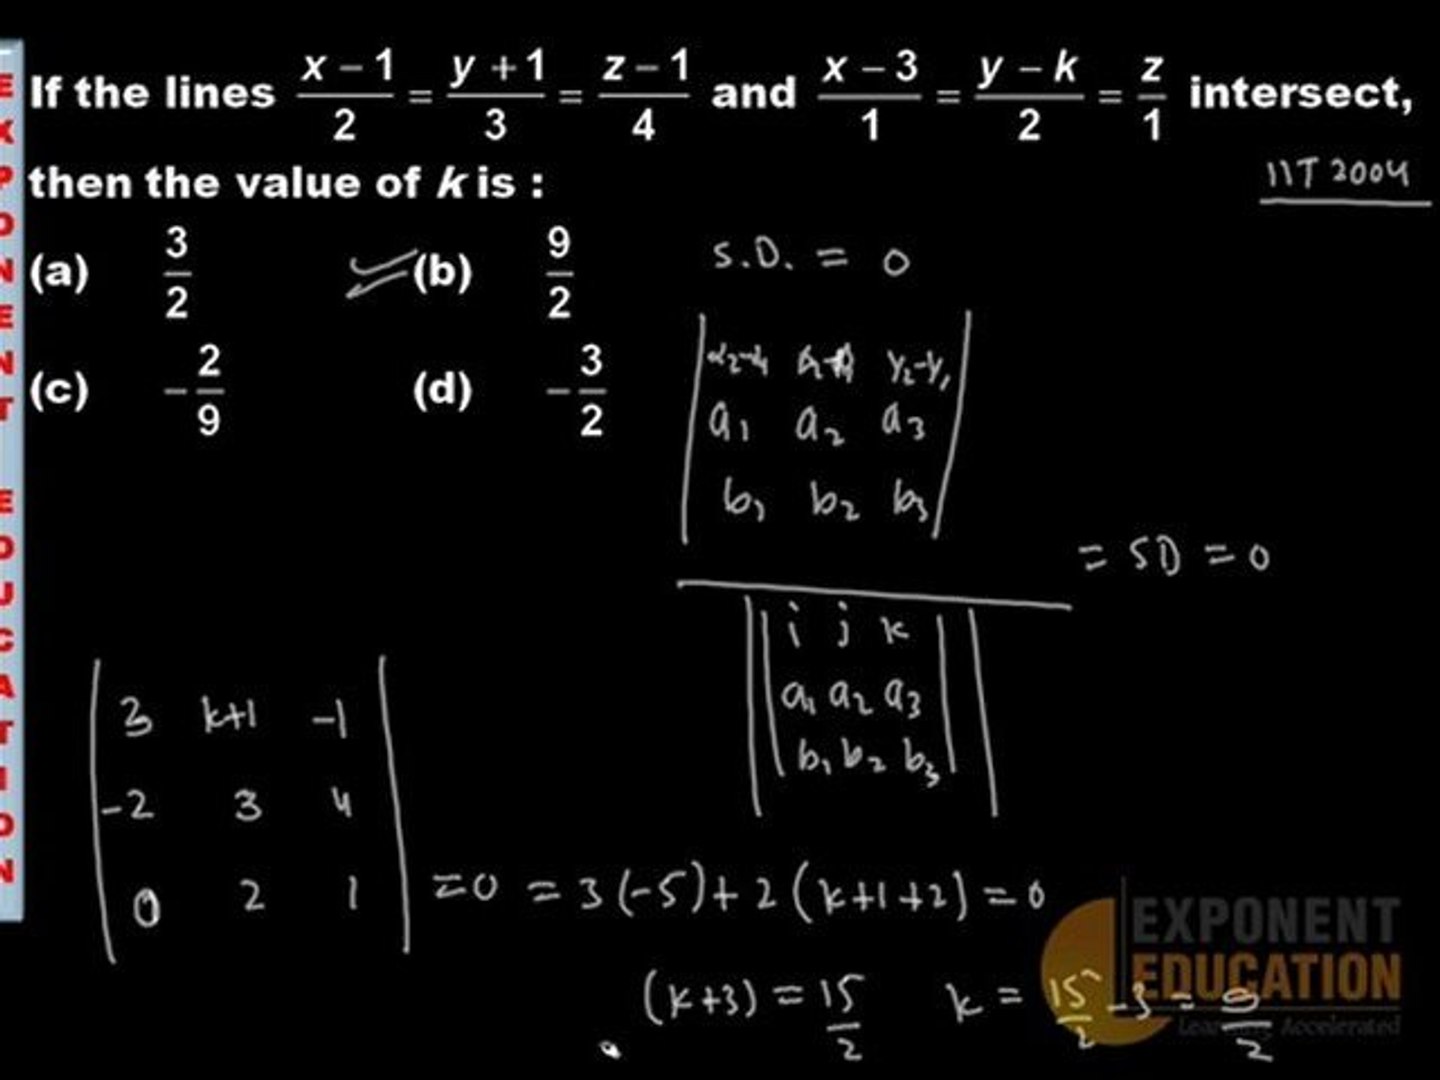 Coordinate Geometry IIT JEE Maths solutions,JEE Maths Differentiation, AIEEE Maths, IIT Coaching,